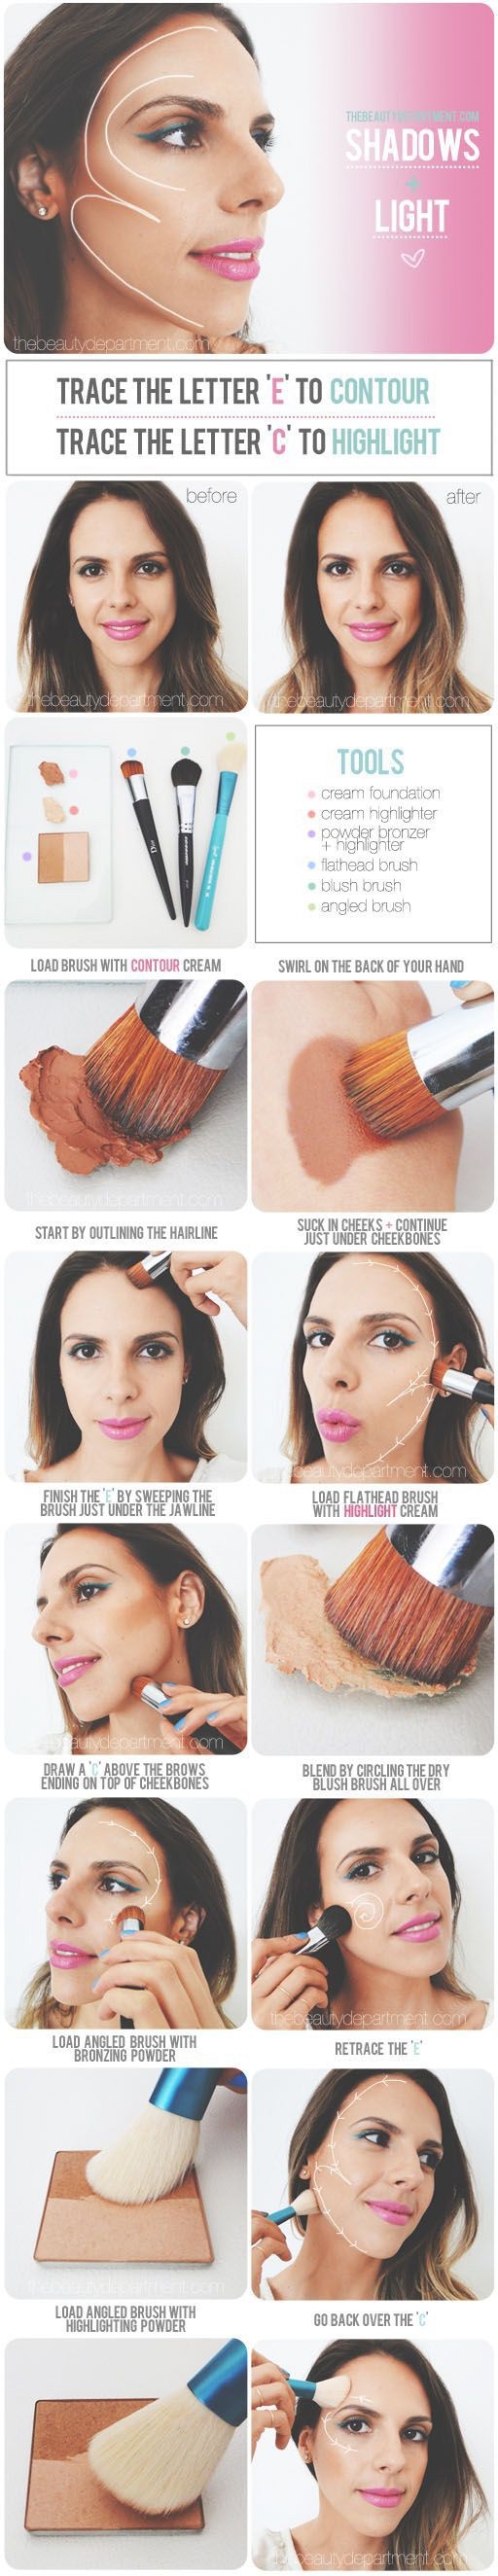 20 Highlighting and Contouring Hacks, Tips and Tricks That Will Change Your Life